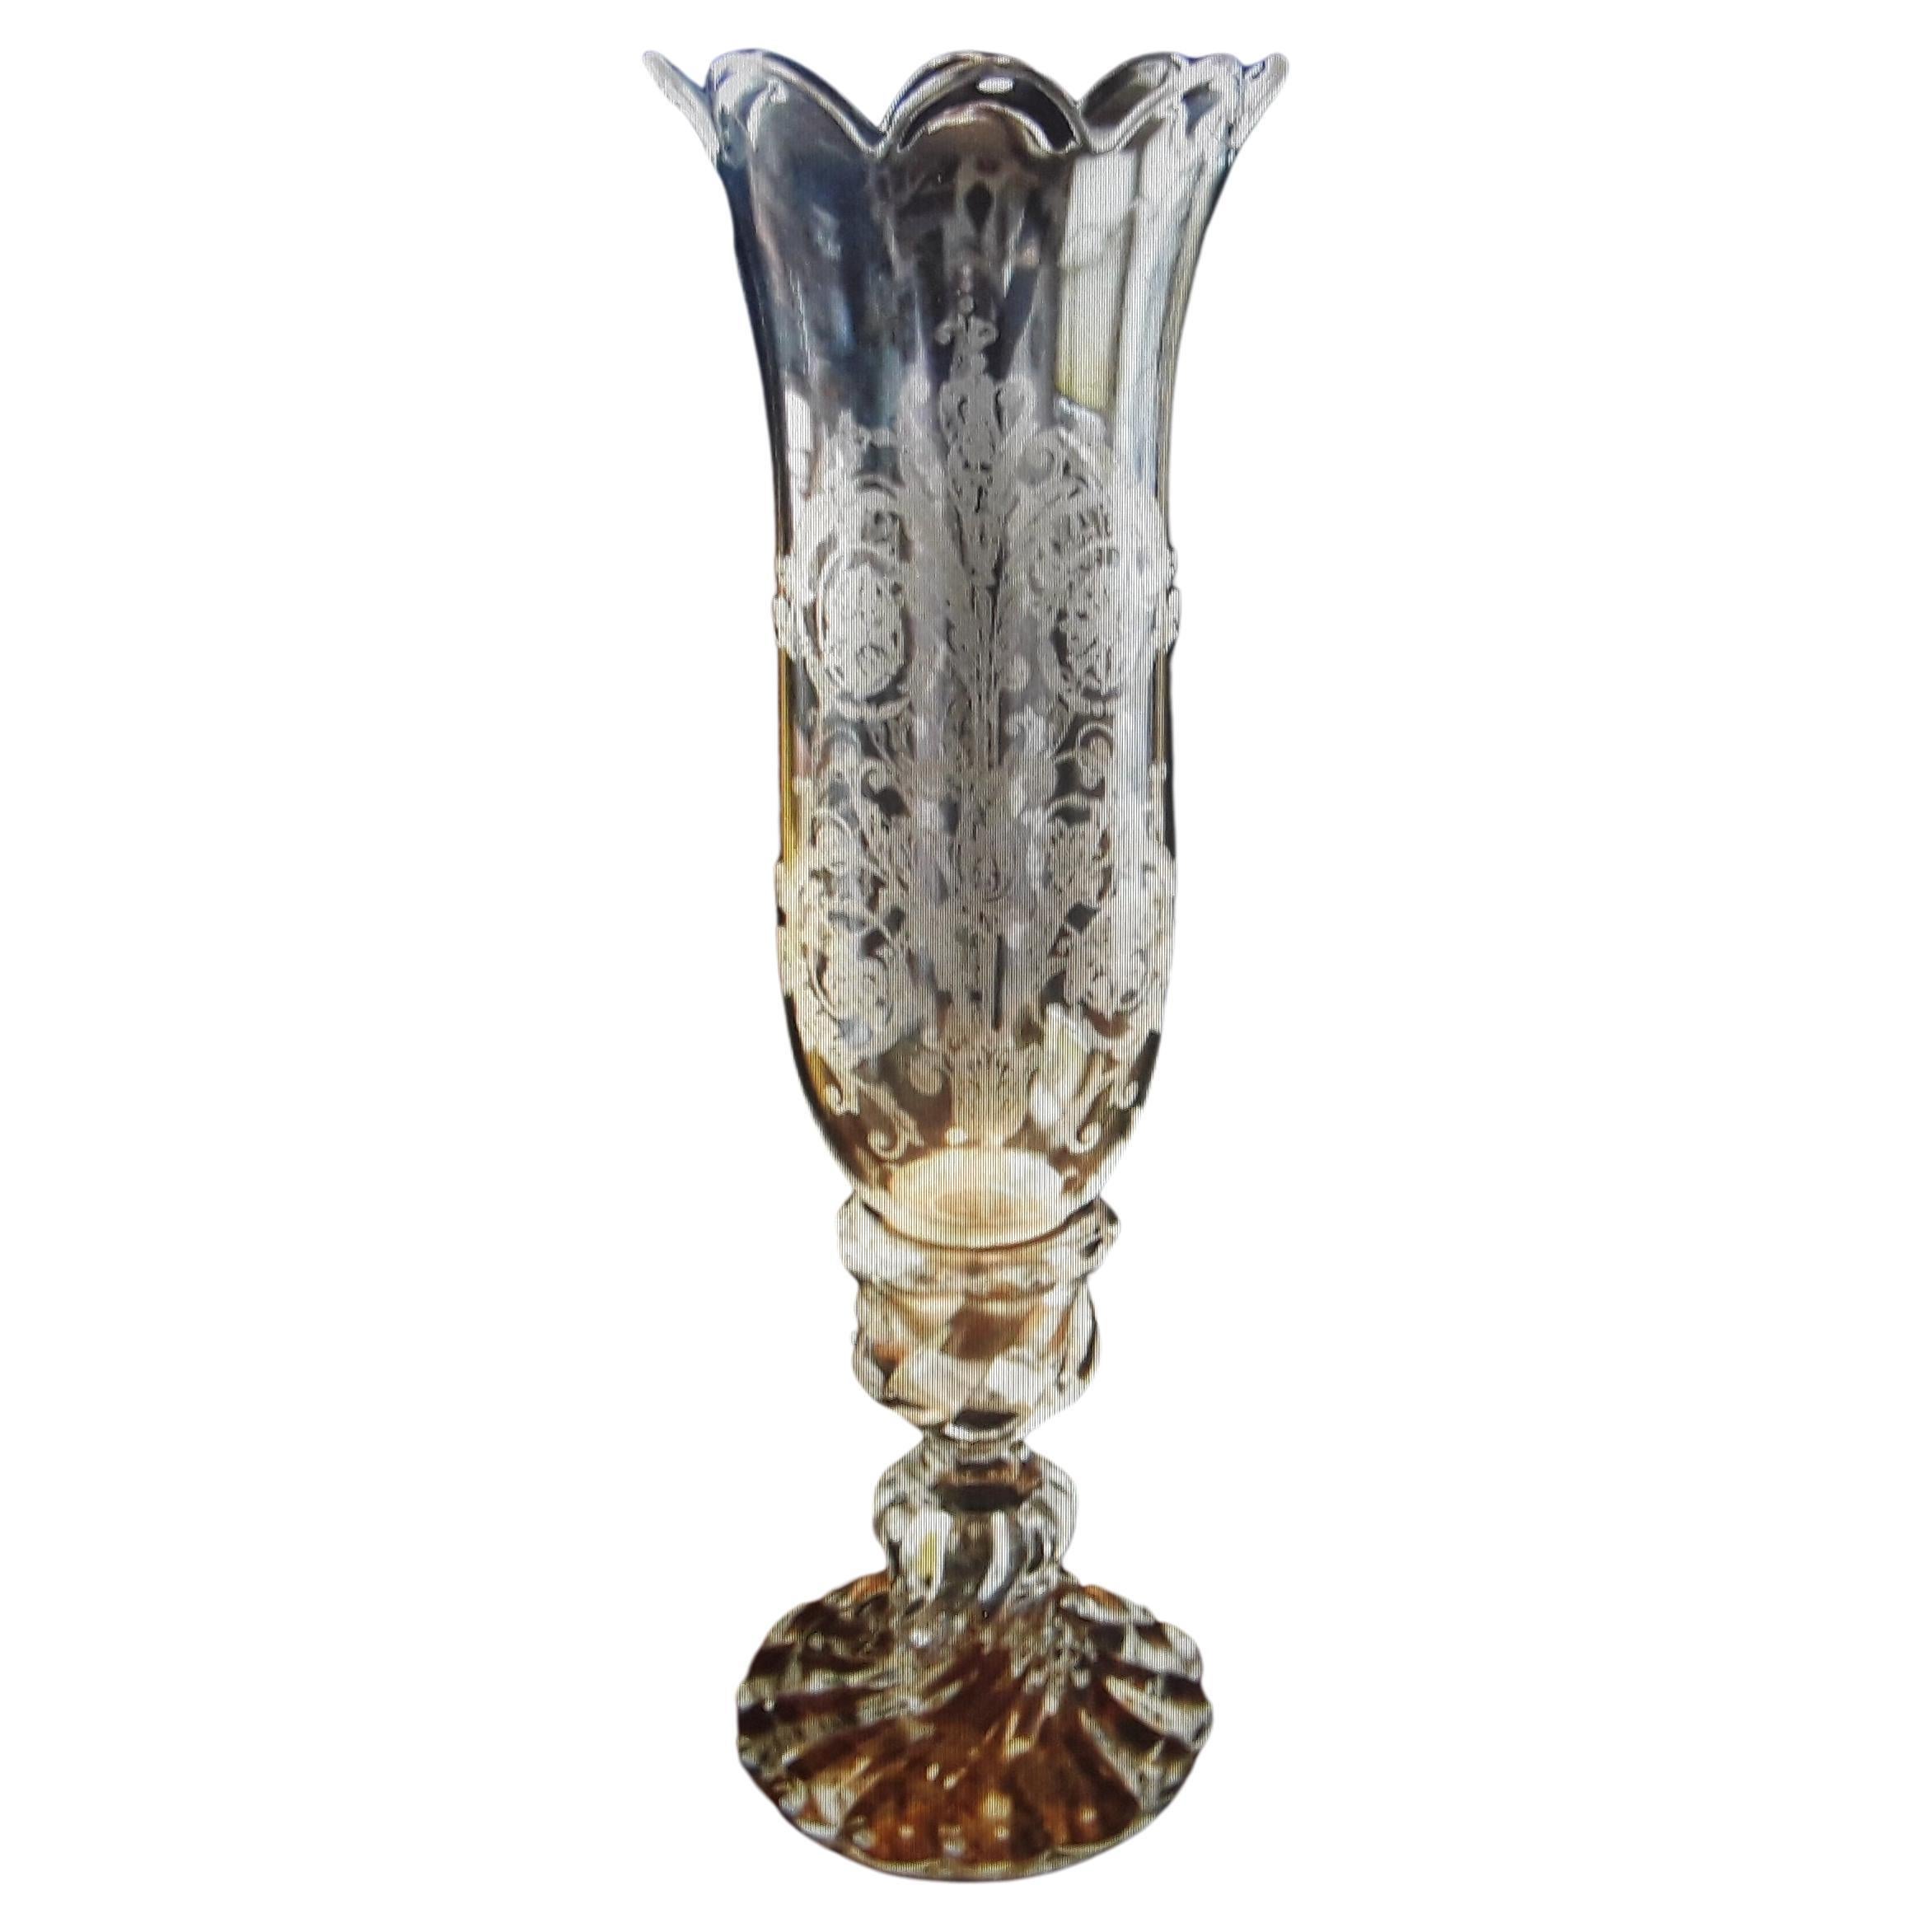 1940's French Hollywood Regency Signed Baccarat 2 Piece Candle Lamp "Swirl" (lampe à bougie) en vente